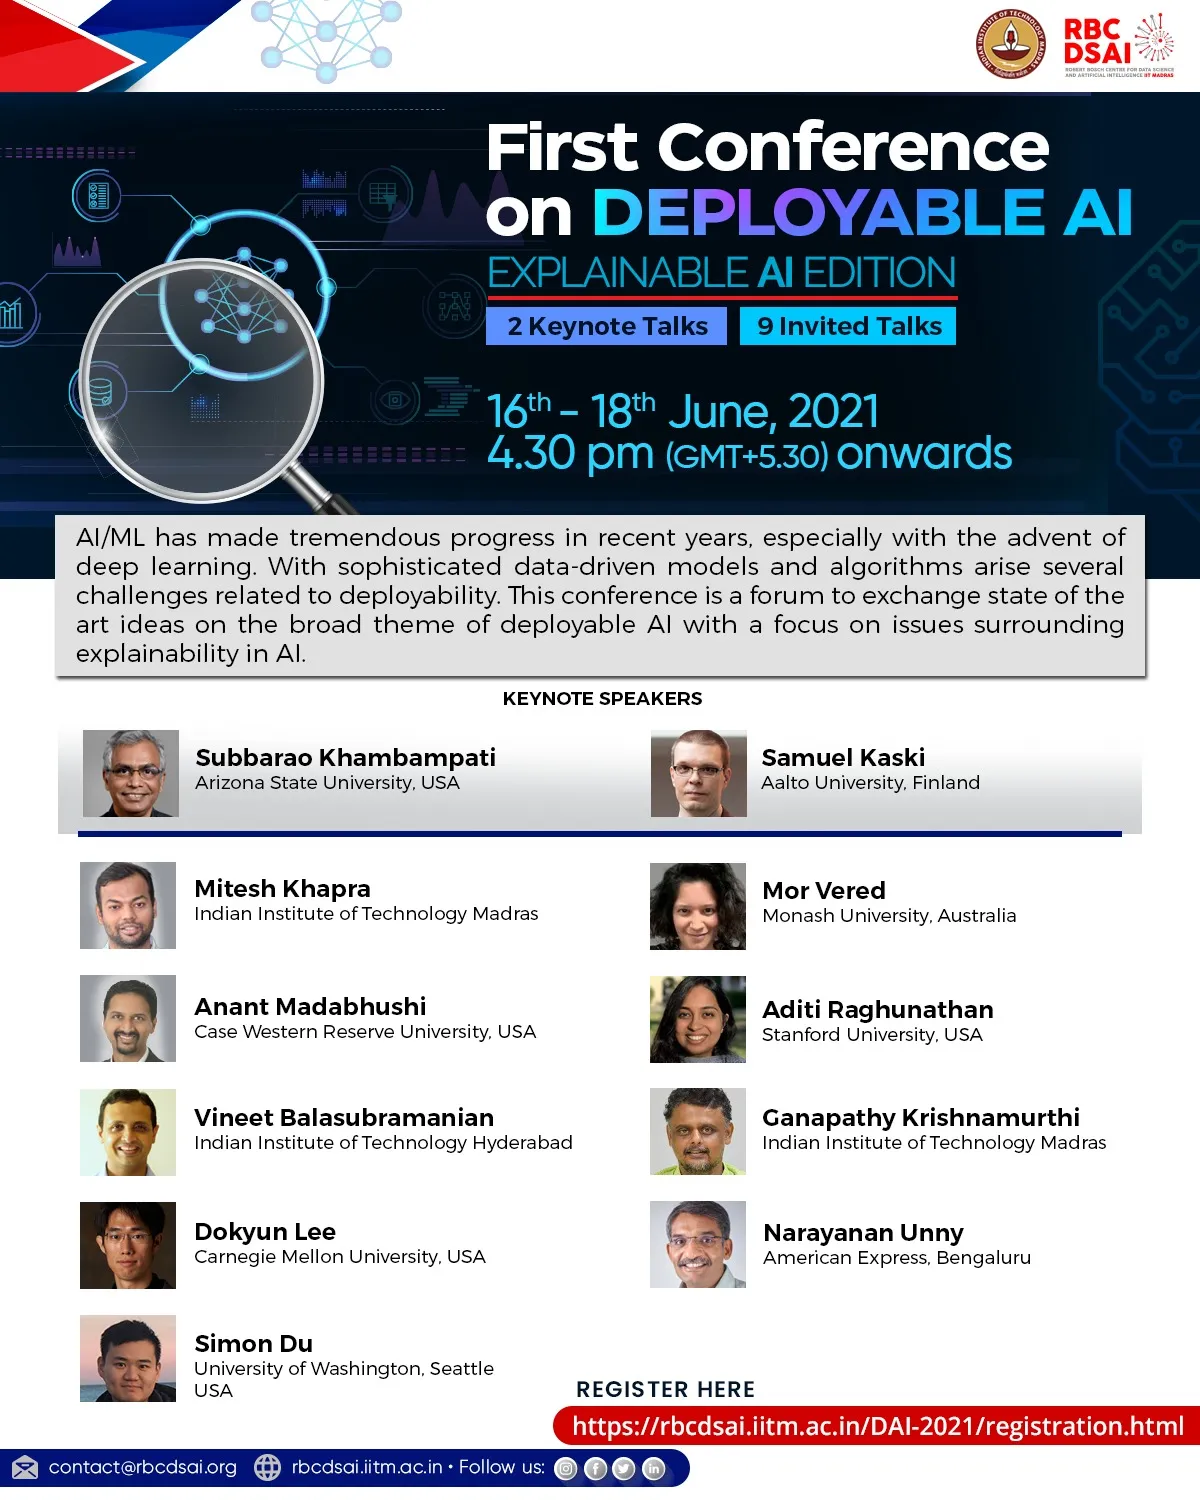 First Conference on Deployable AI